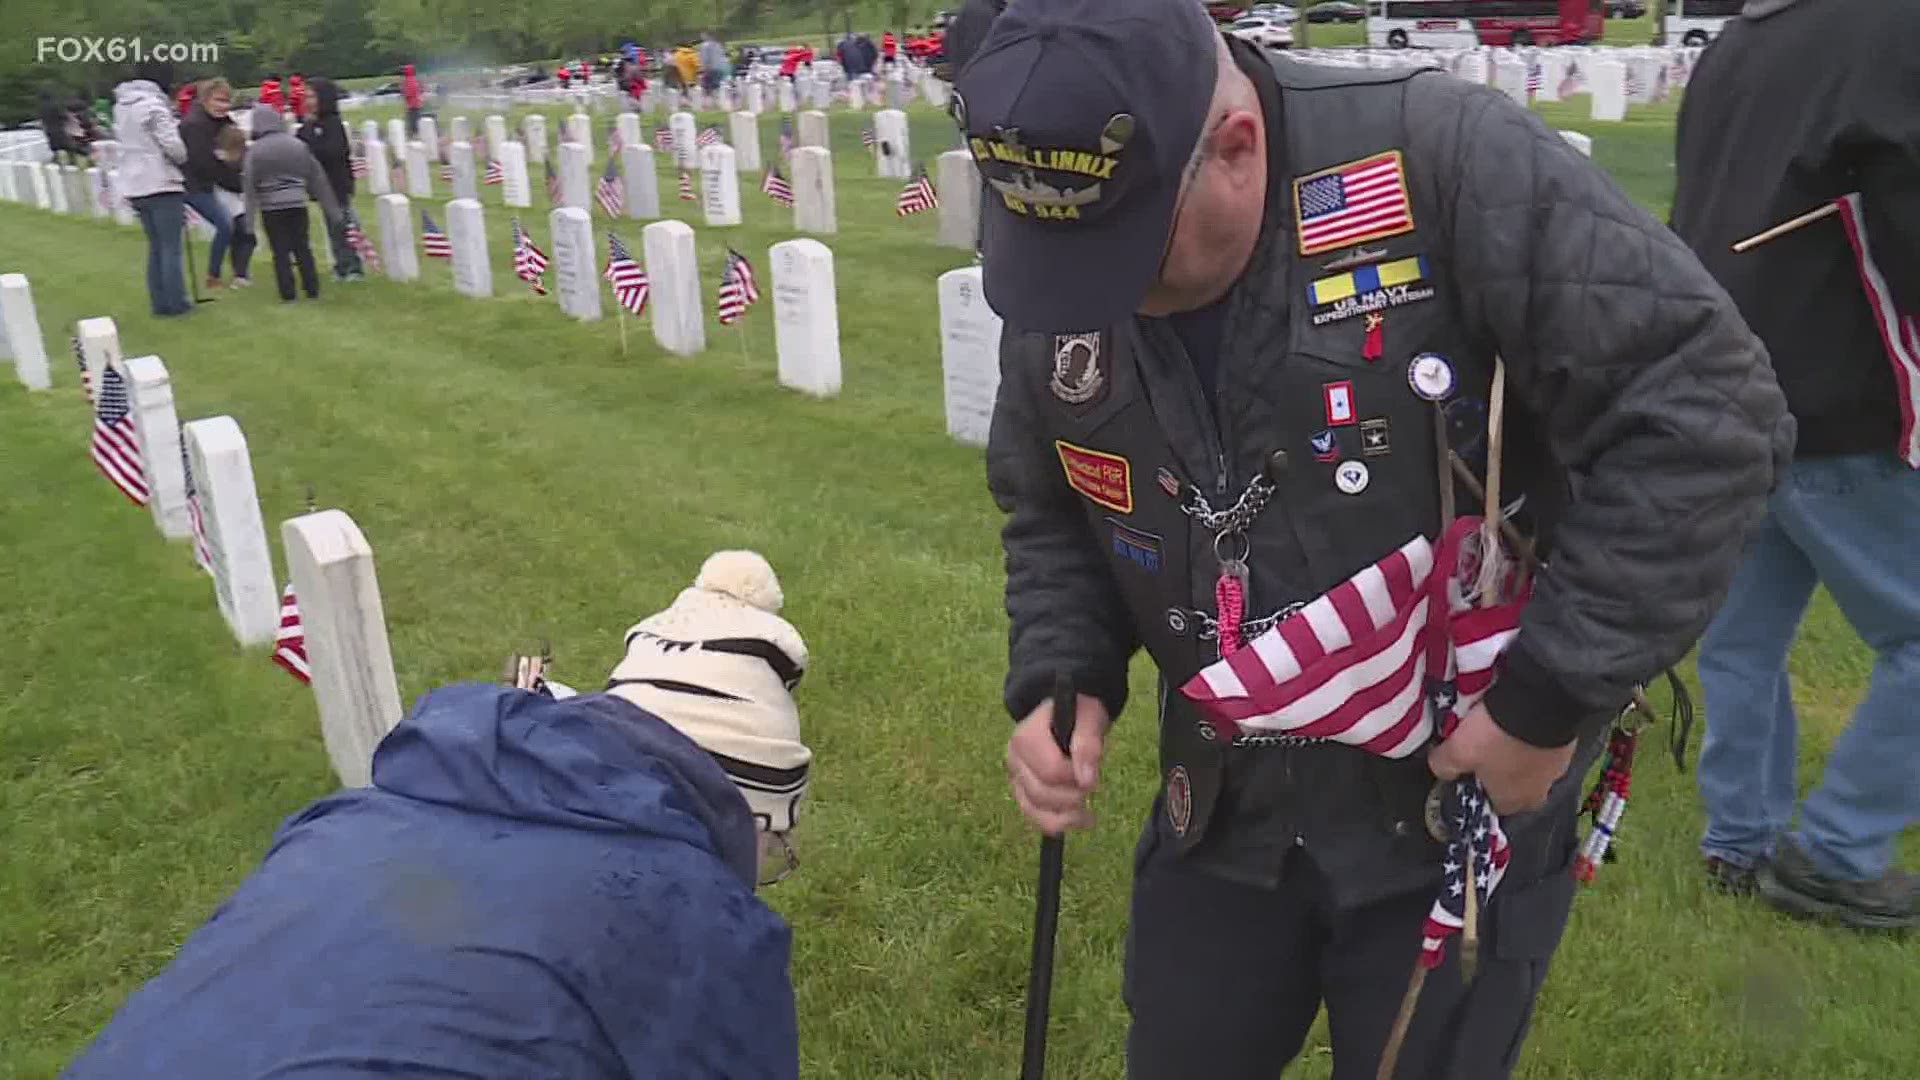 Veterans and community members took part once again in preparing the cemetery for Memorial Day.